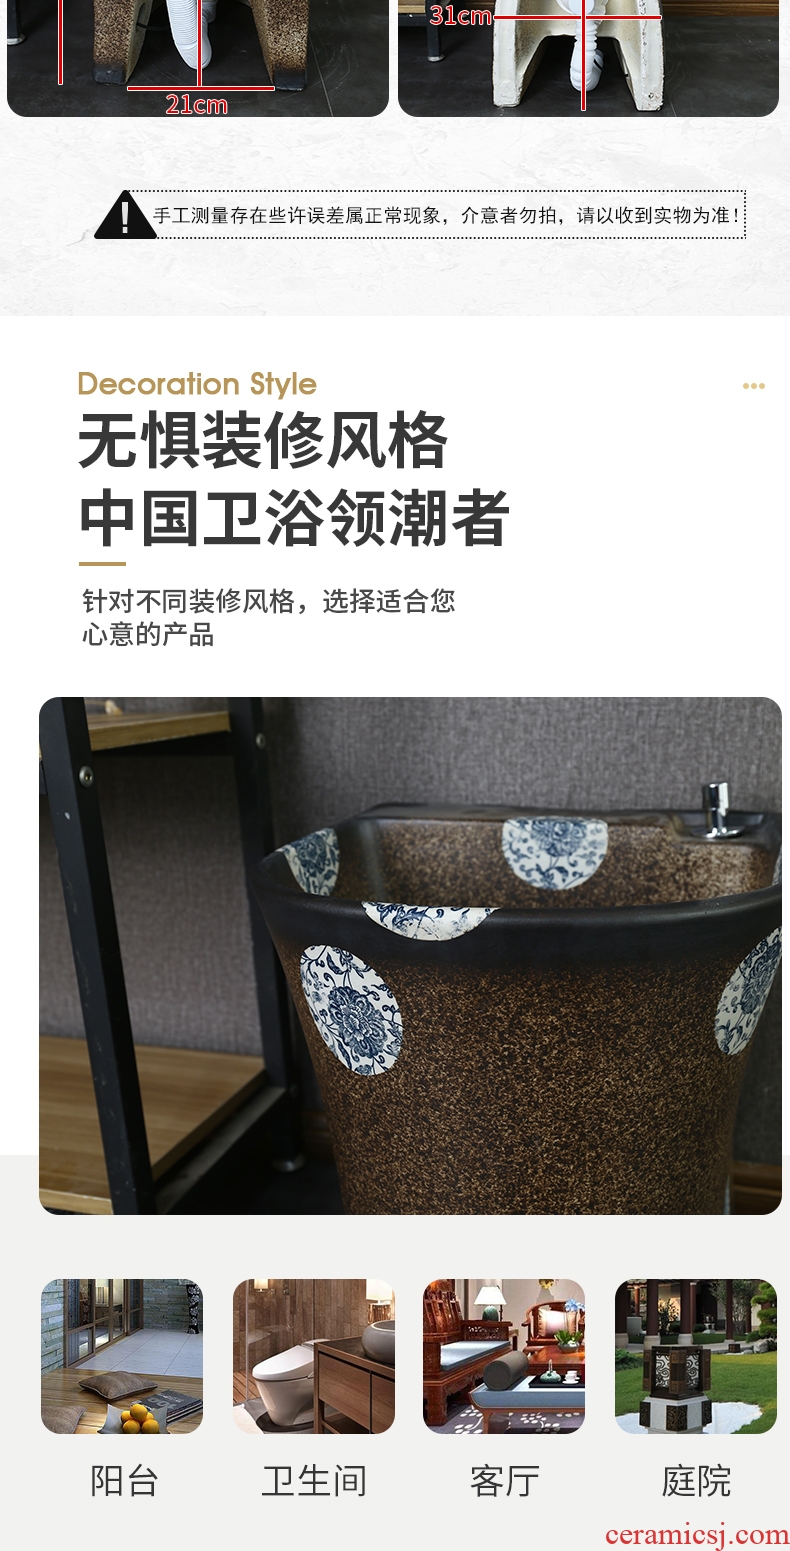 Basin of Chinese style household cleaning ceramic mop mop pool balcony toilet small pool floor mop mop pool